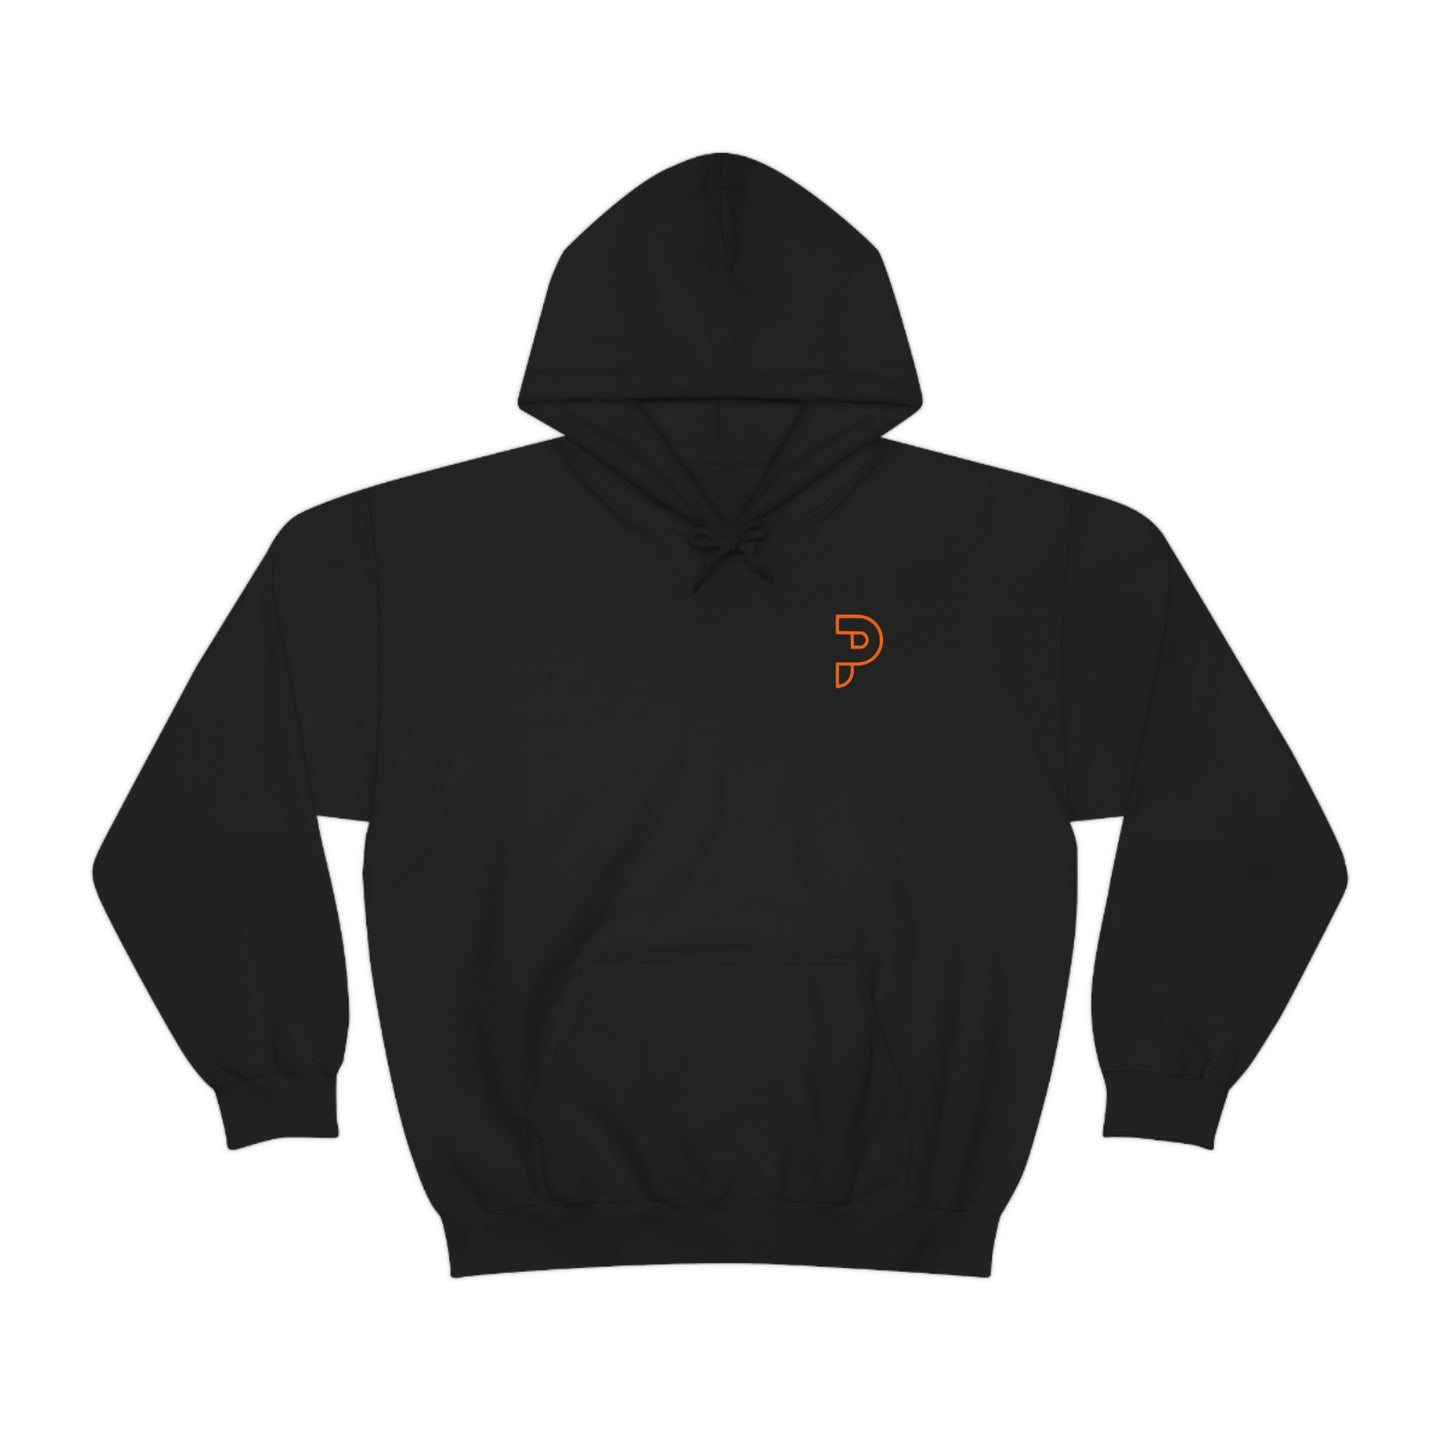 PAYTON PAGE DOUBLE-SIDED HOODIE